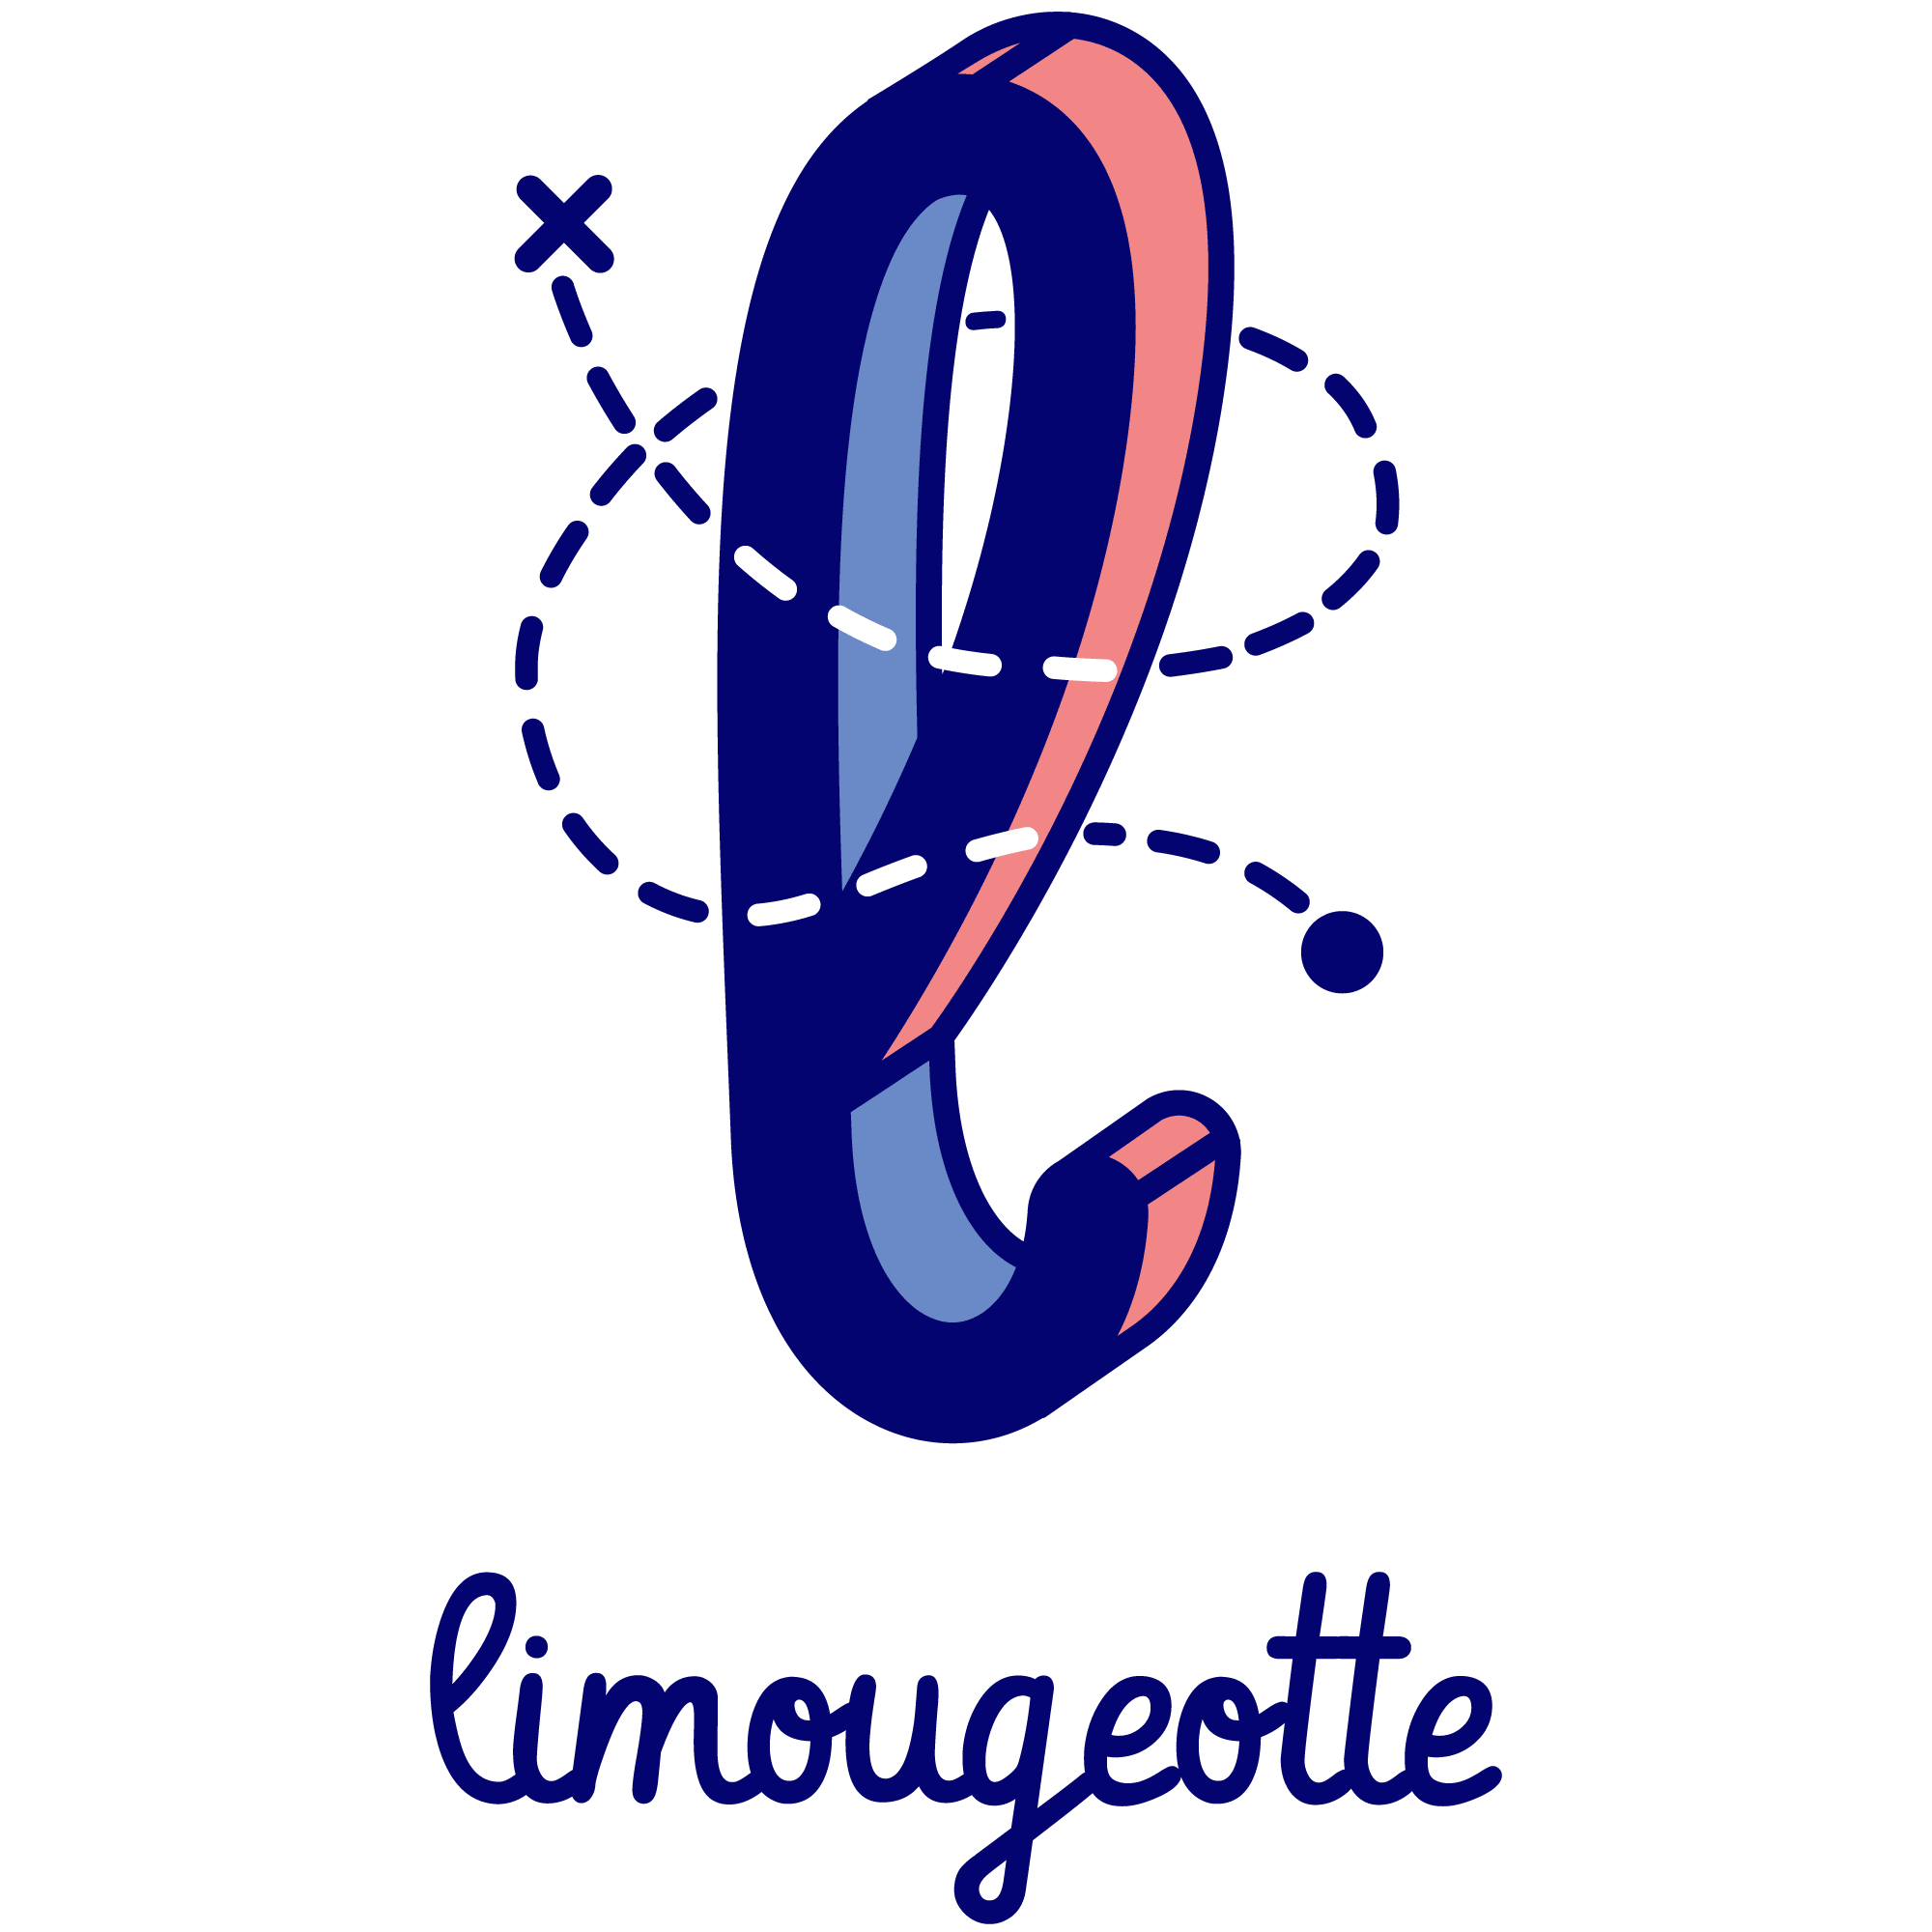 Limougeotte